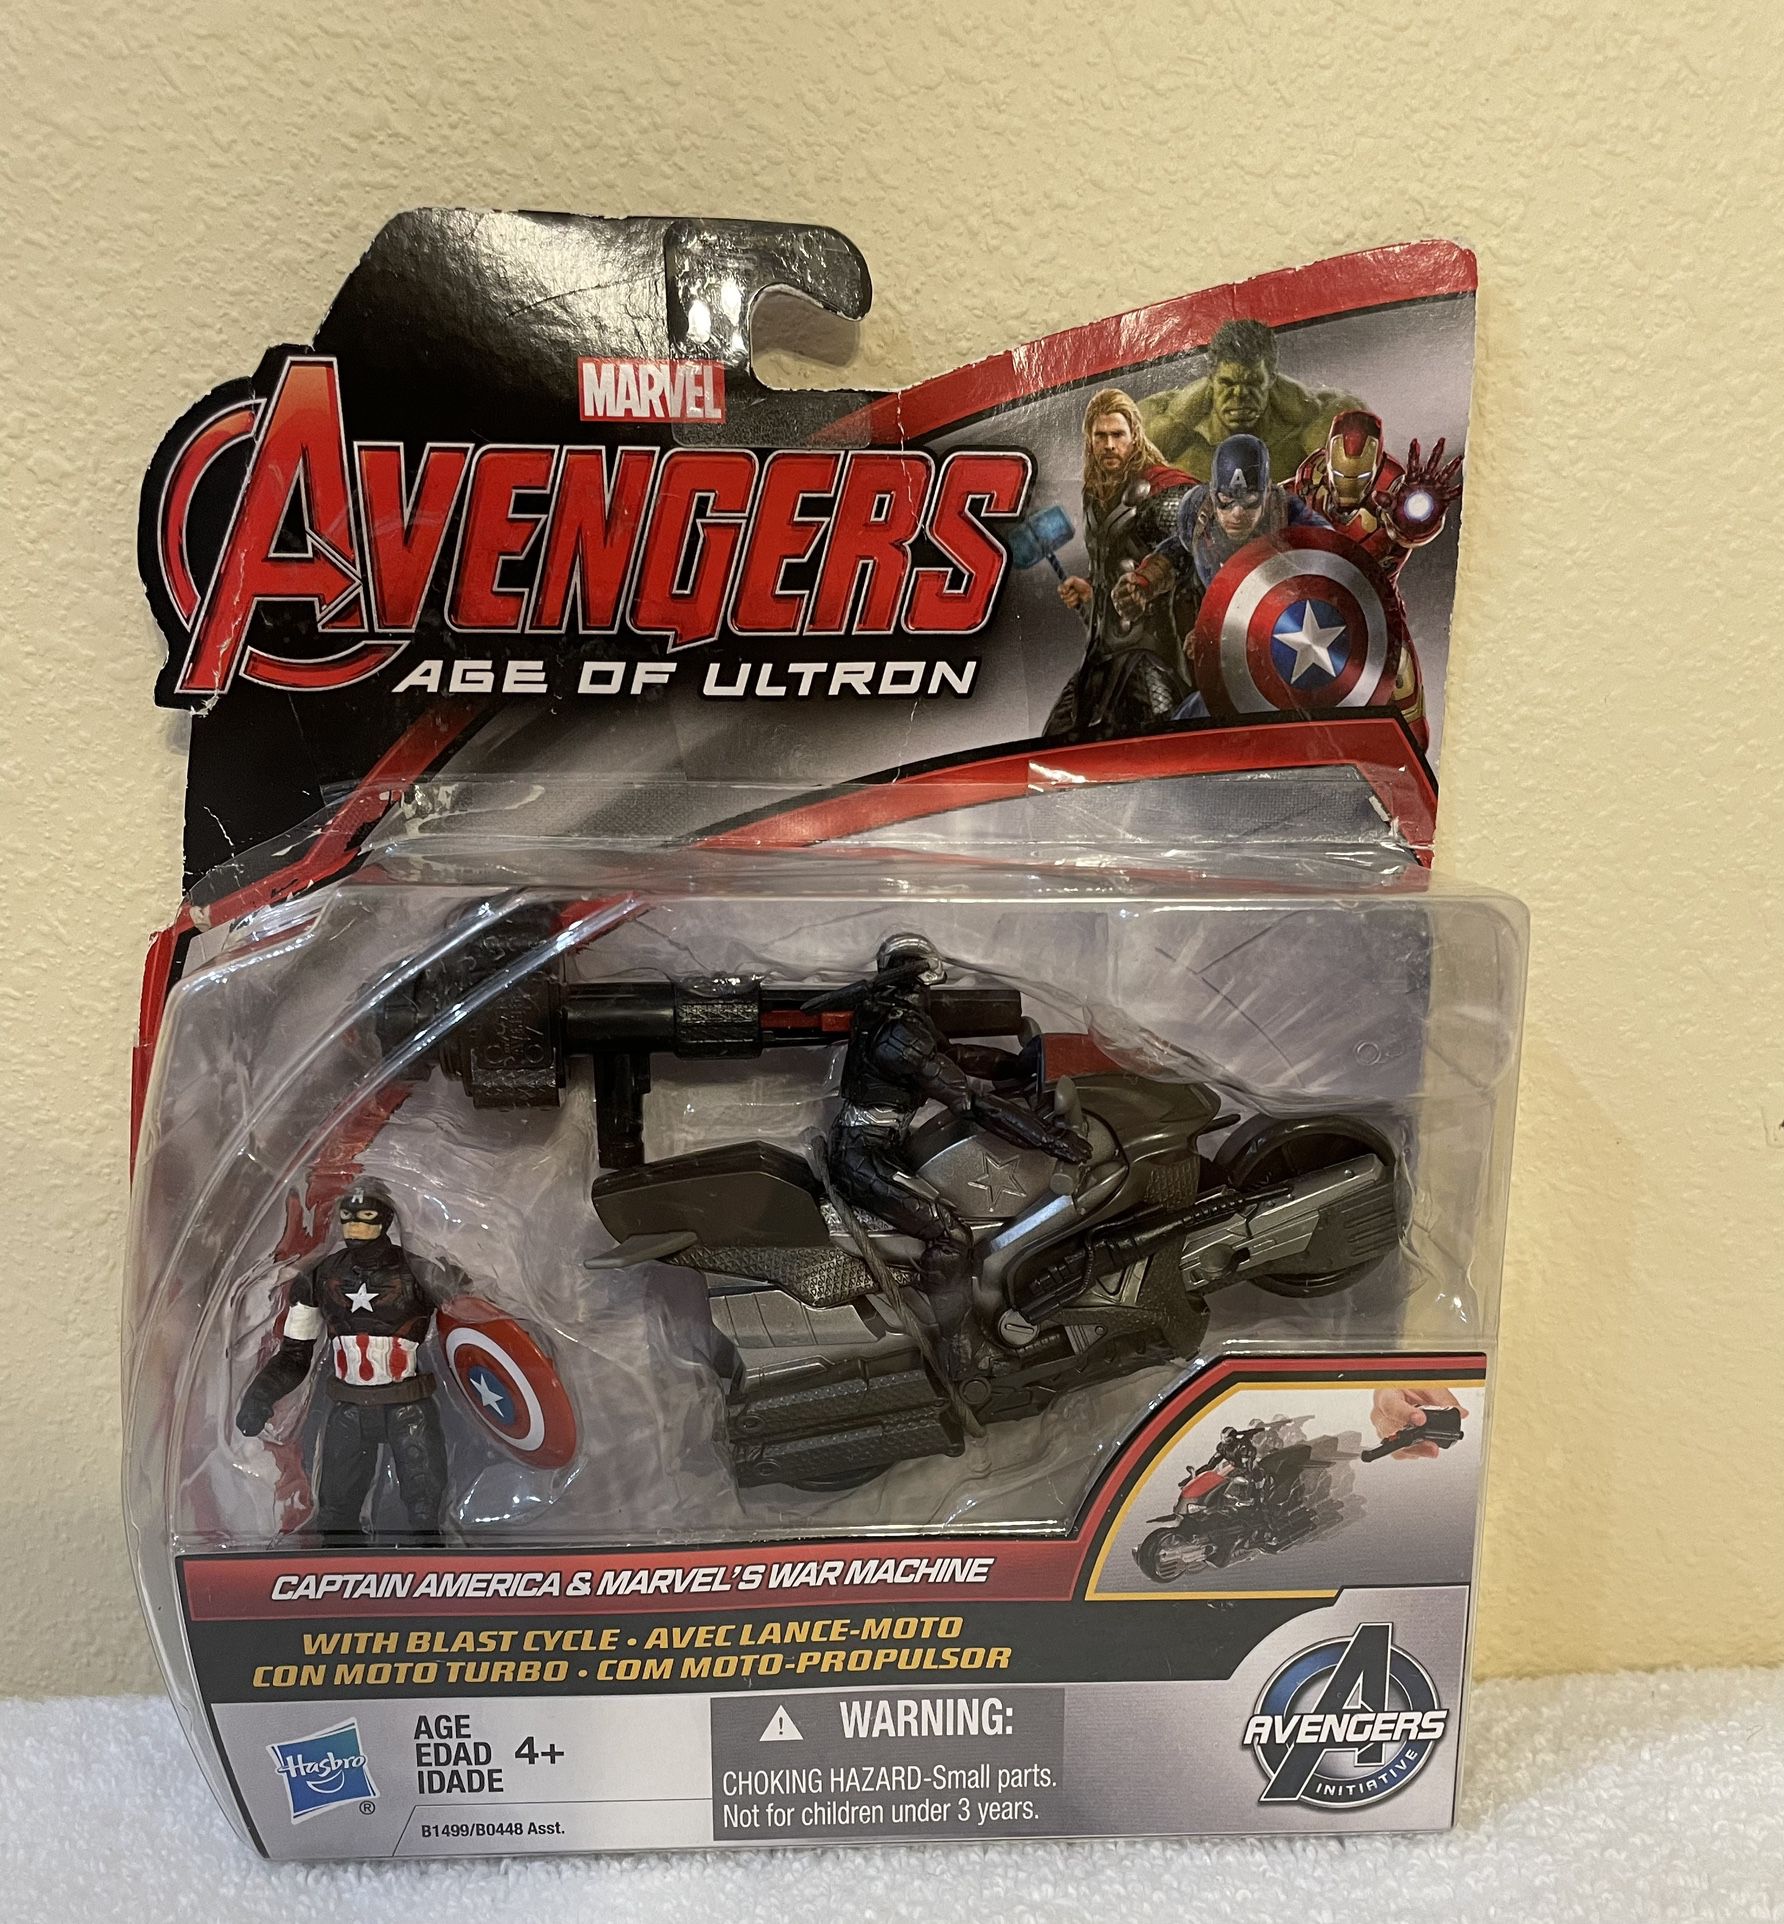 Marvel Avengers Age of Ultron Captain America and War Machine & Blast Cycle MOC